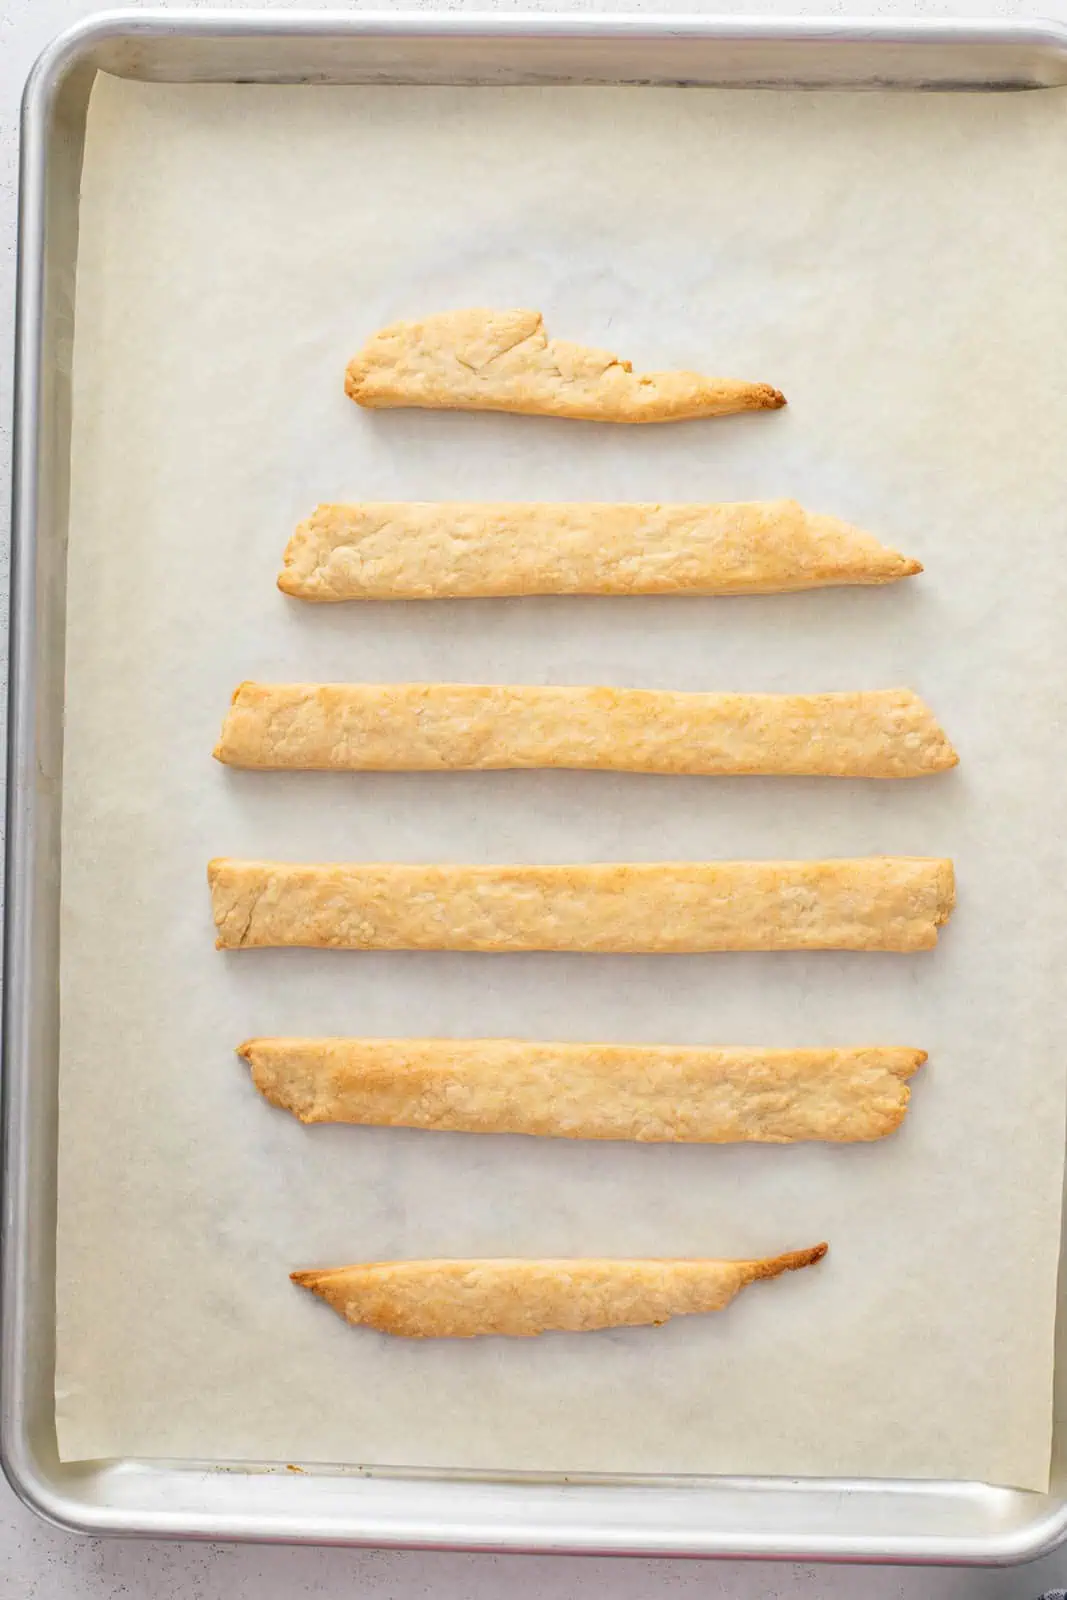 Baked strips of pastry dough on a baking sheet.